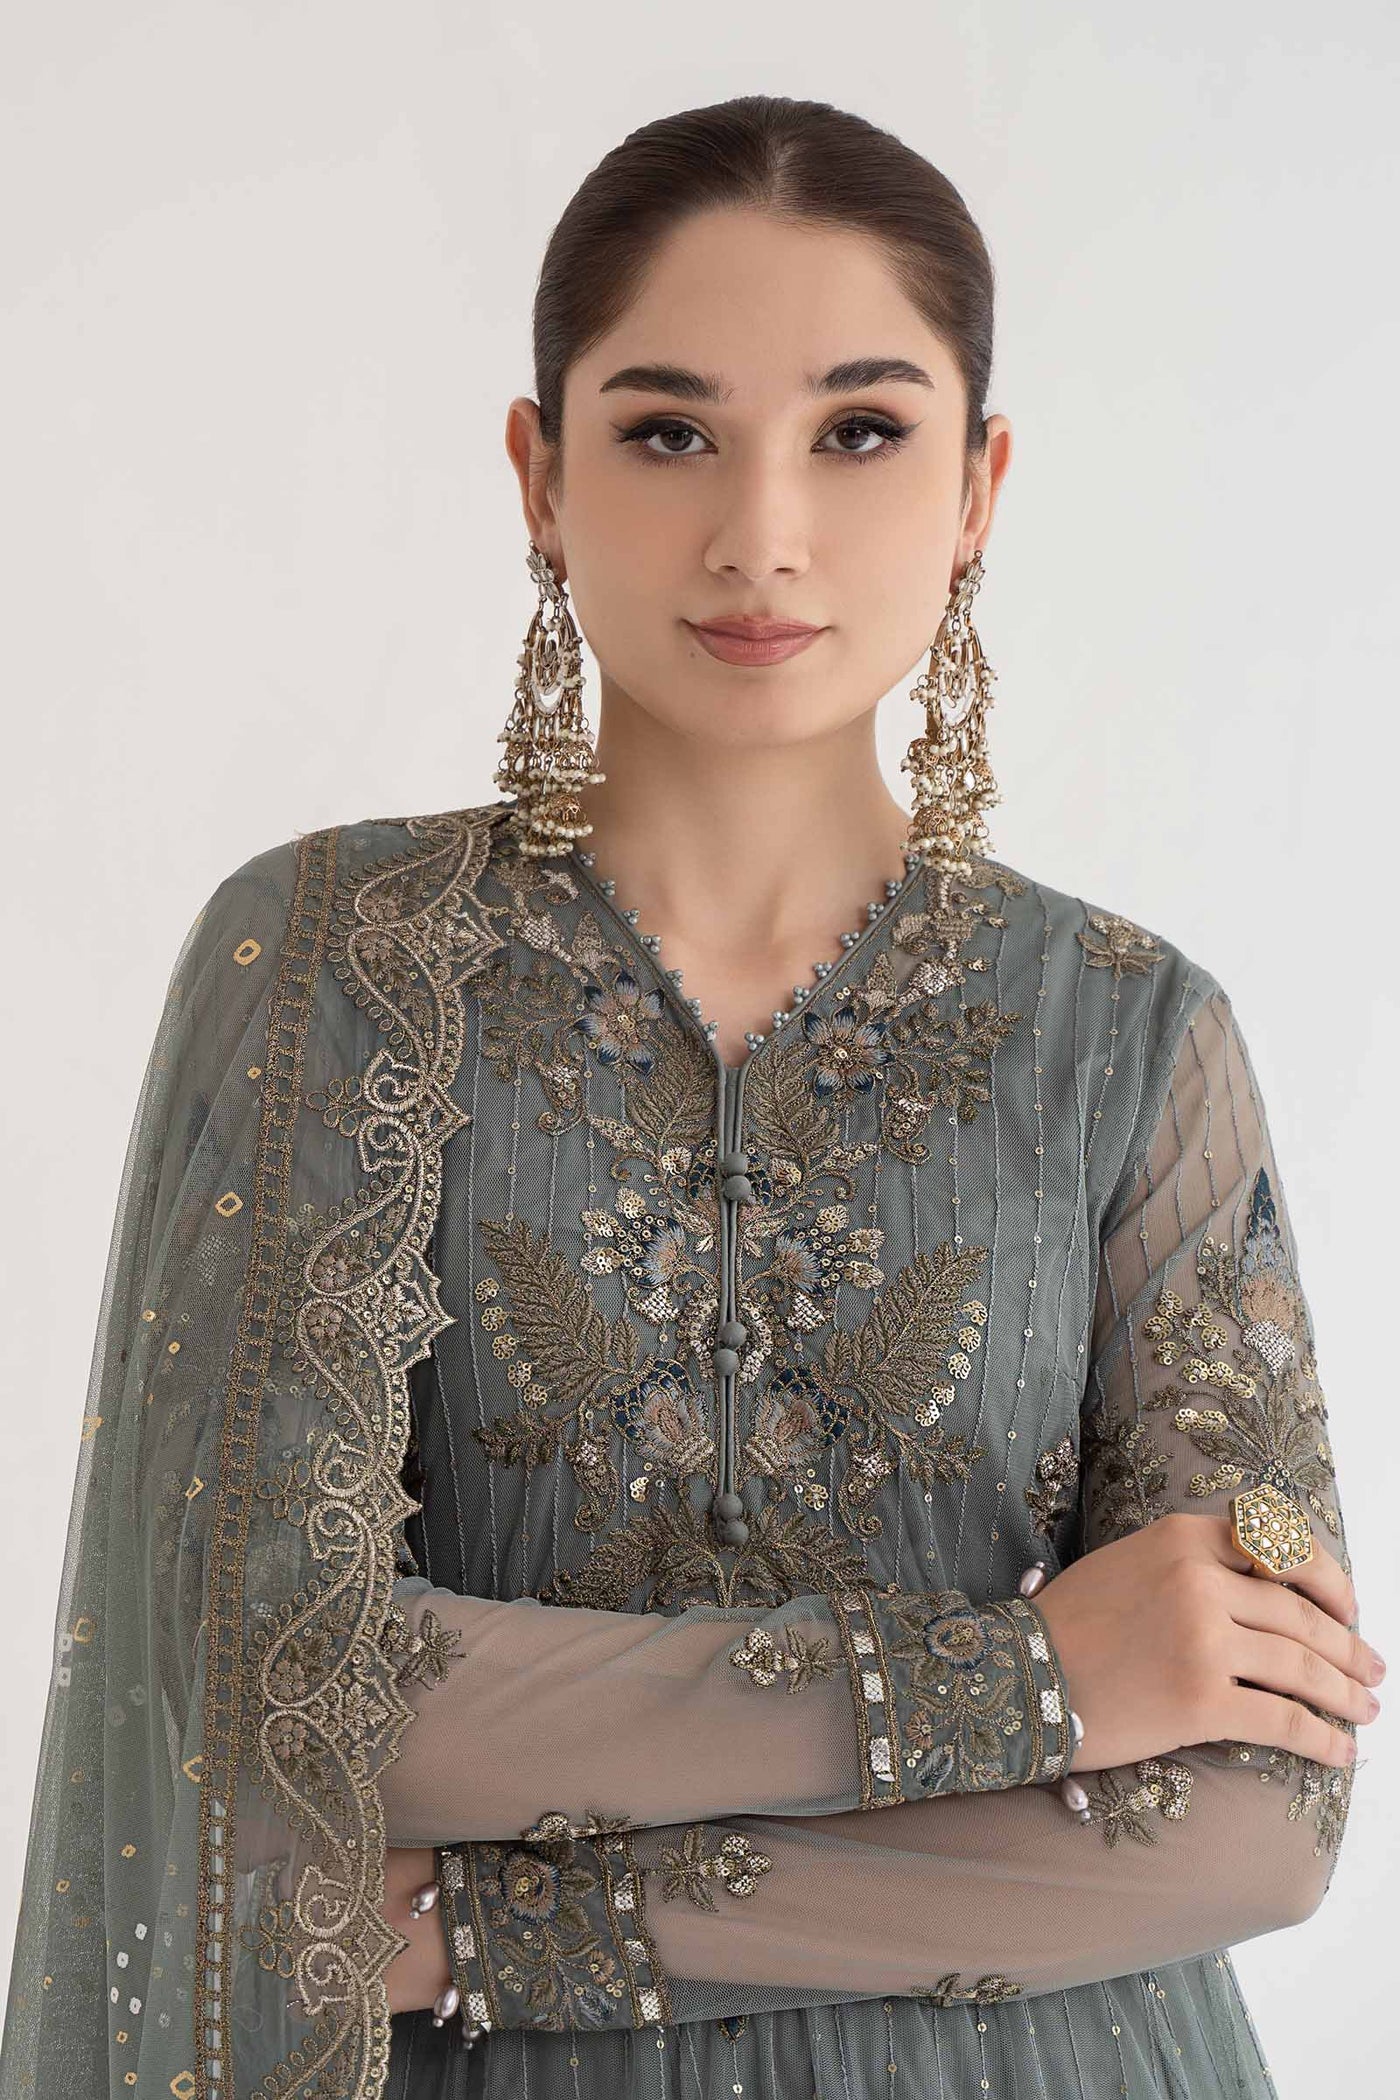 3 PIECE EMBROIDERED NET SUIT | DS-2403-A